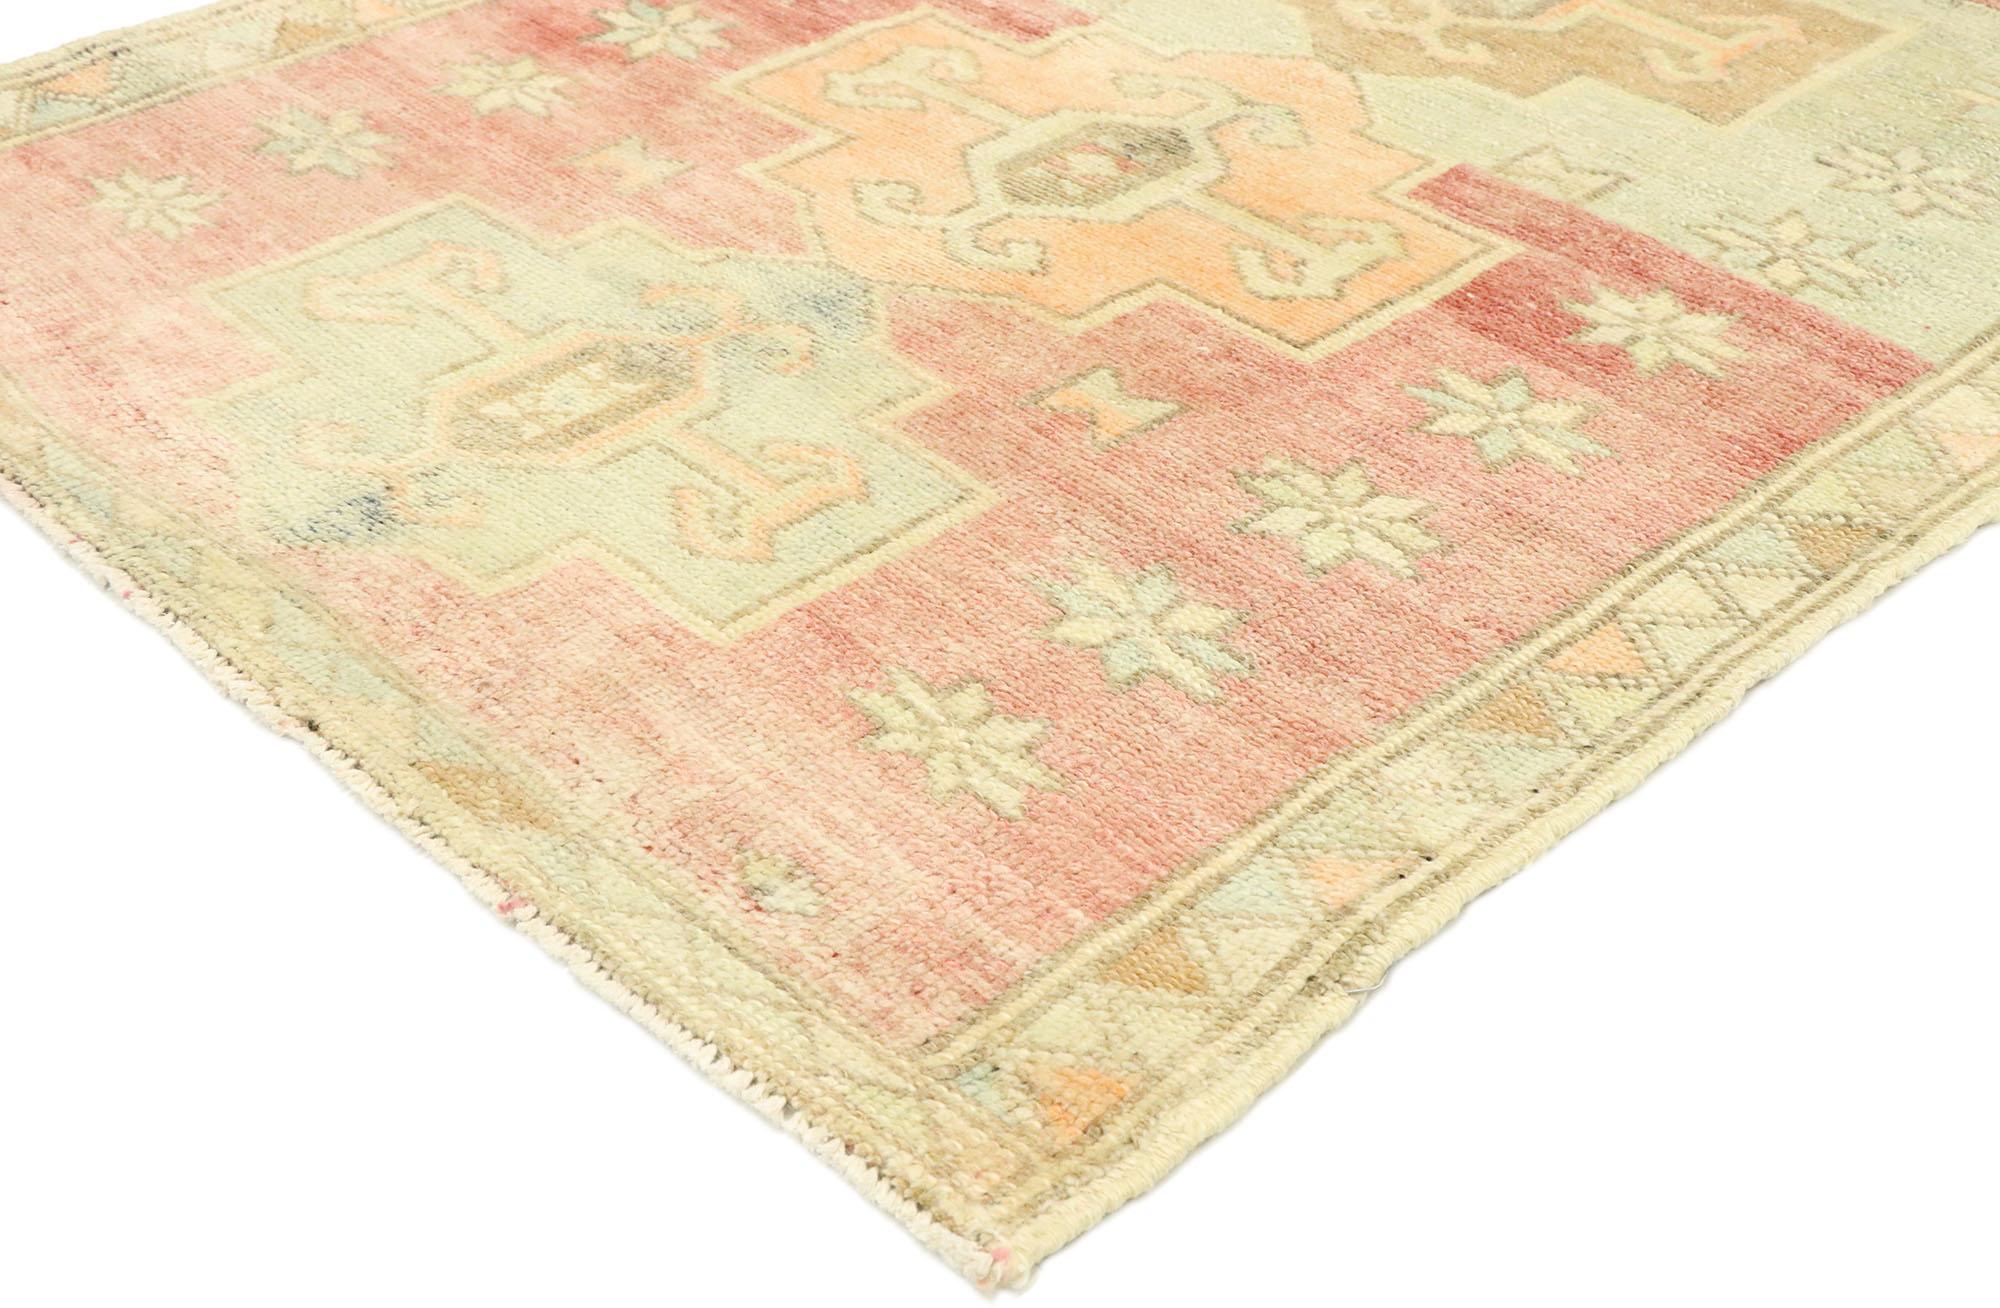 53030 Vintage Turkish Oushak Rug, 02'10 x 06'01. Steeped in centuries-old tradition and meticulously crafted by skilled artisans, antique-washed Turkish Oushak rugs originate from the revered Oushak region, where they undergo a meticulous washing